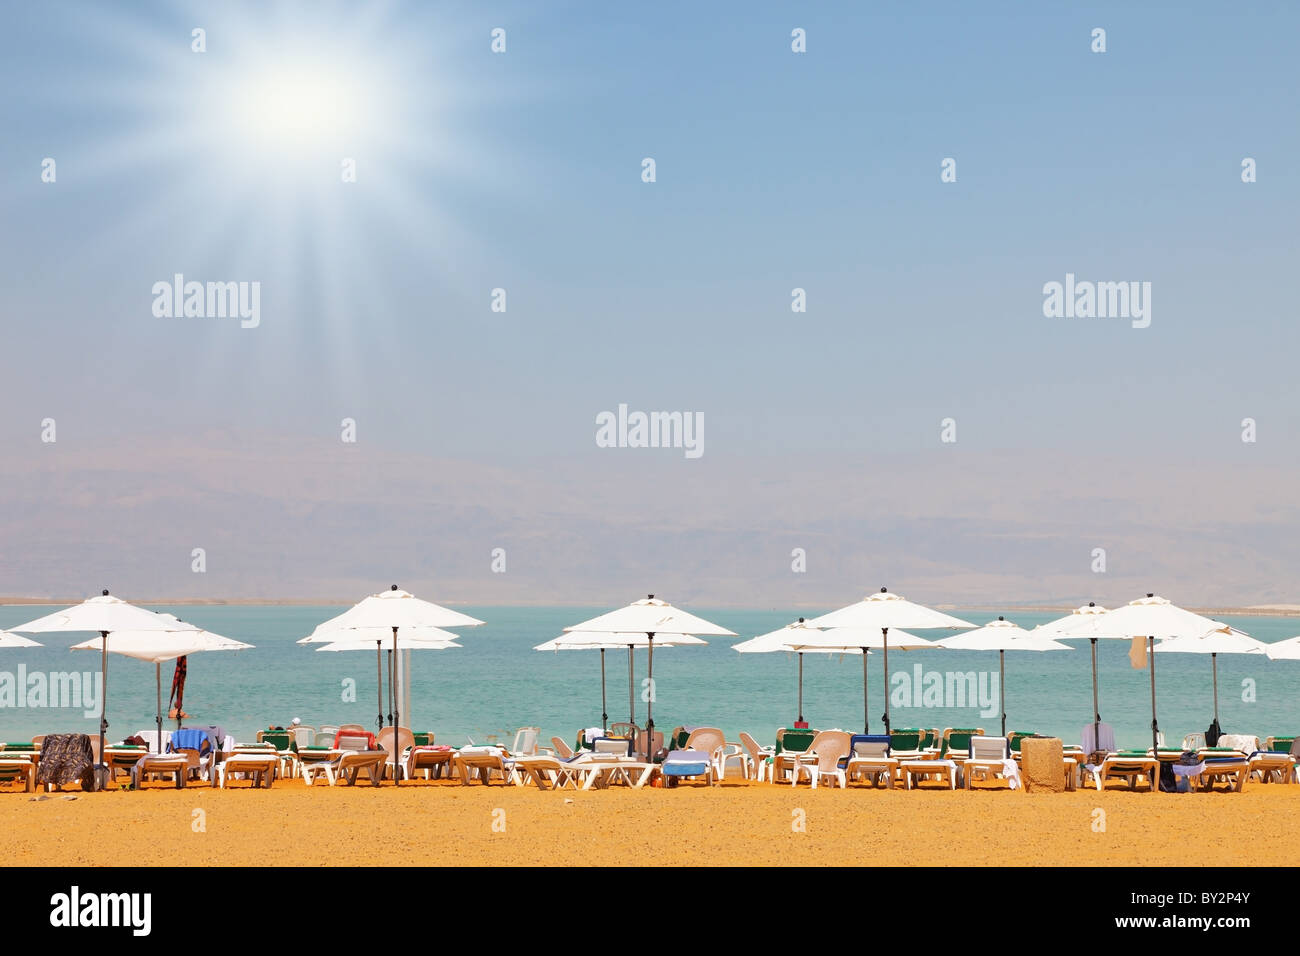 Sun beds, chairs, umbrellas and awnings on the beach luxury hotel on the Dead Sea in Israel. Sunny spring day Stock Photo